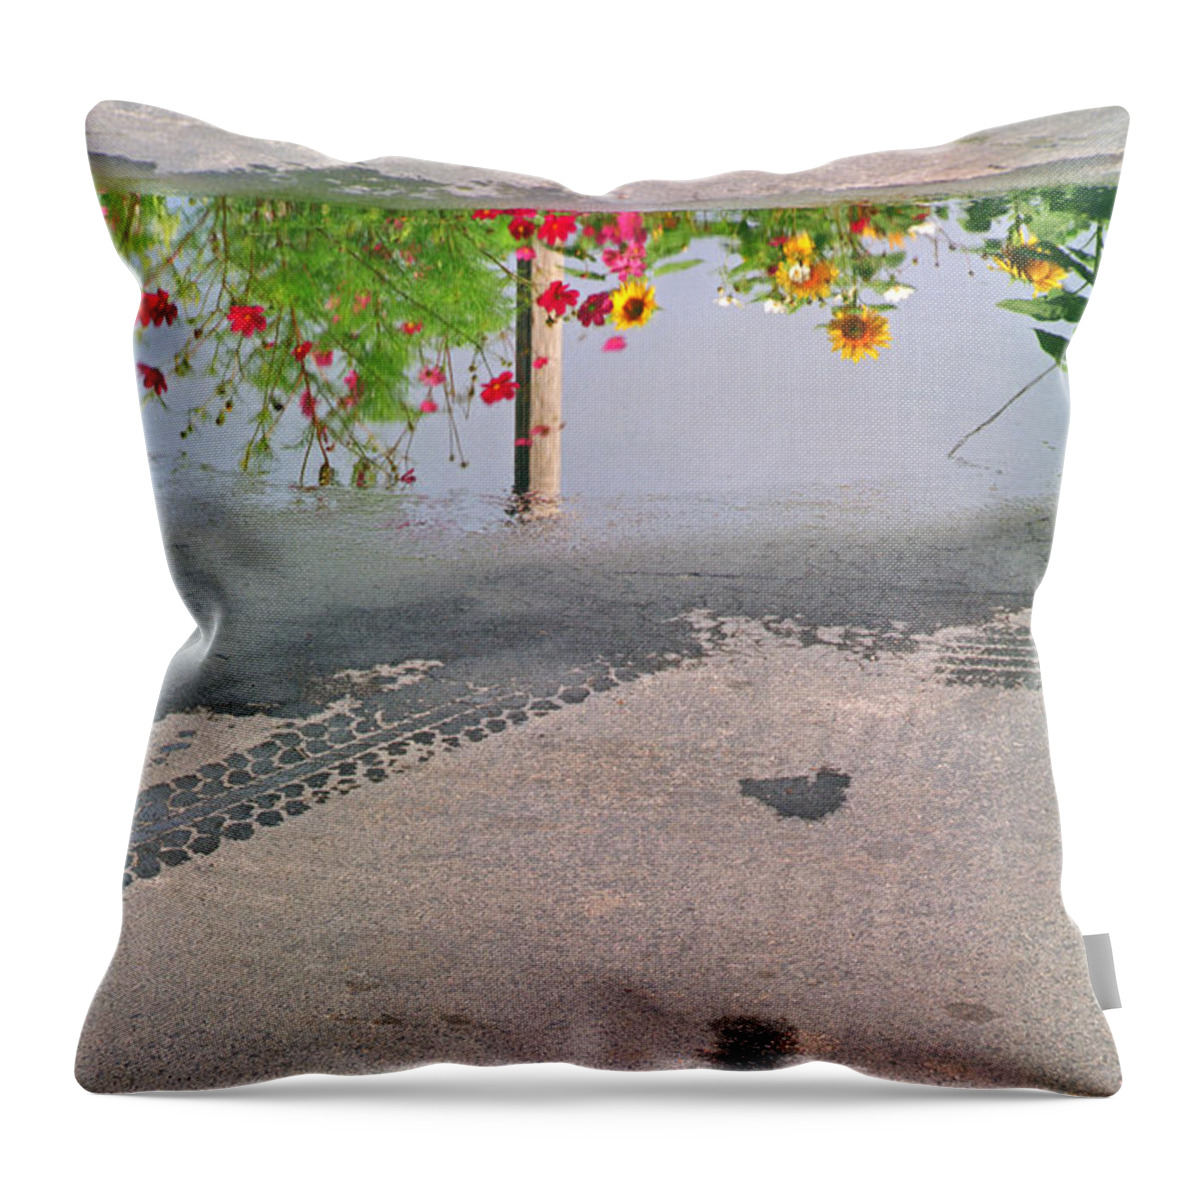 Urban Contrails Throw Pillow featuring the photograph Urban Contrails by Kris Rasmusson